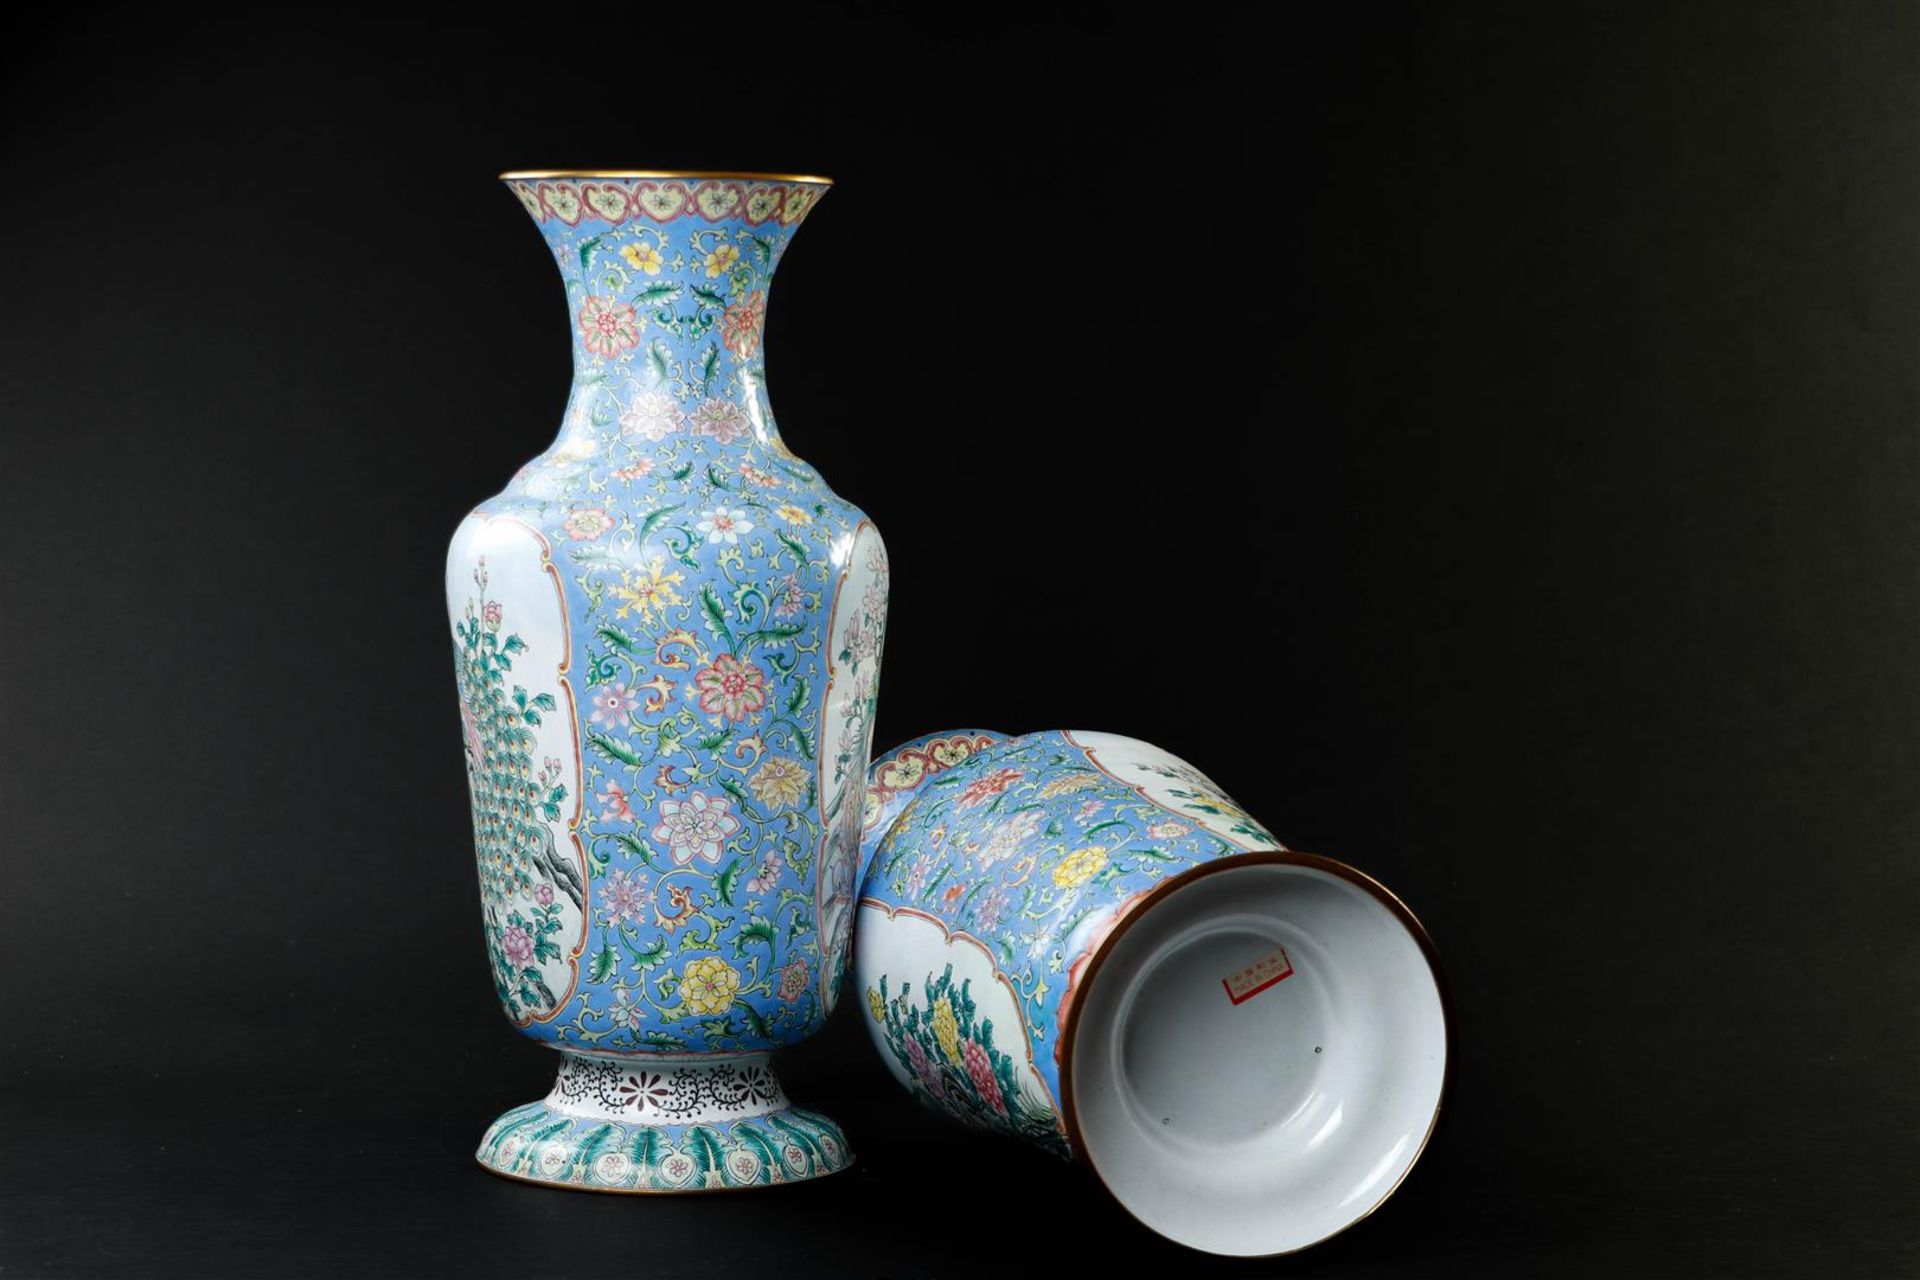 A pair of enamel famille rose vases depicting peacocks. China, 20th century.
H. 44 cm. - Image 6 of 6